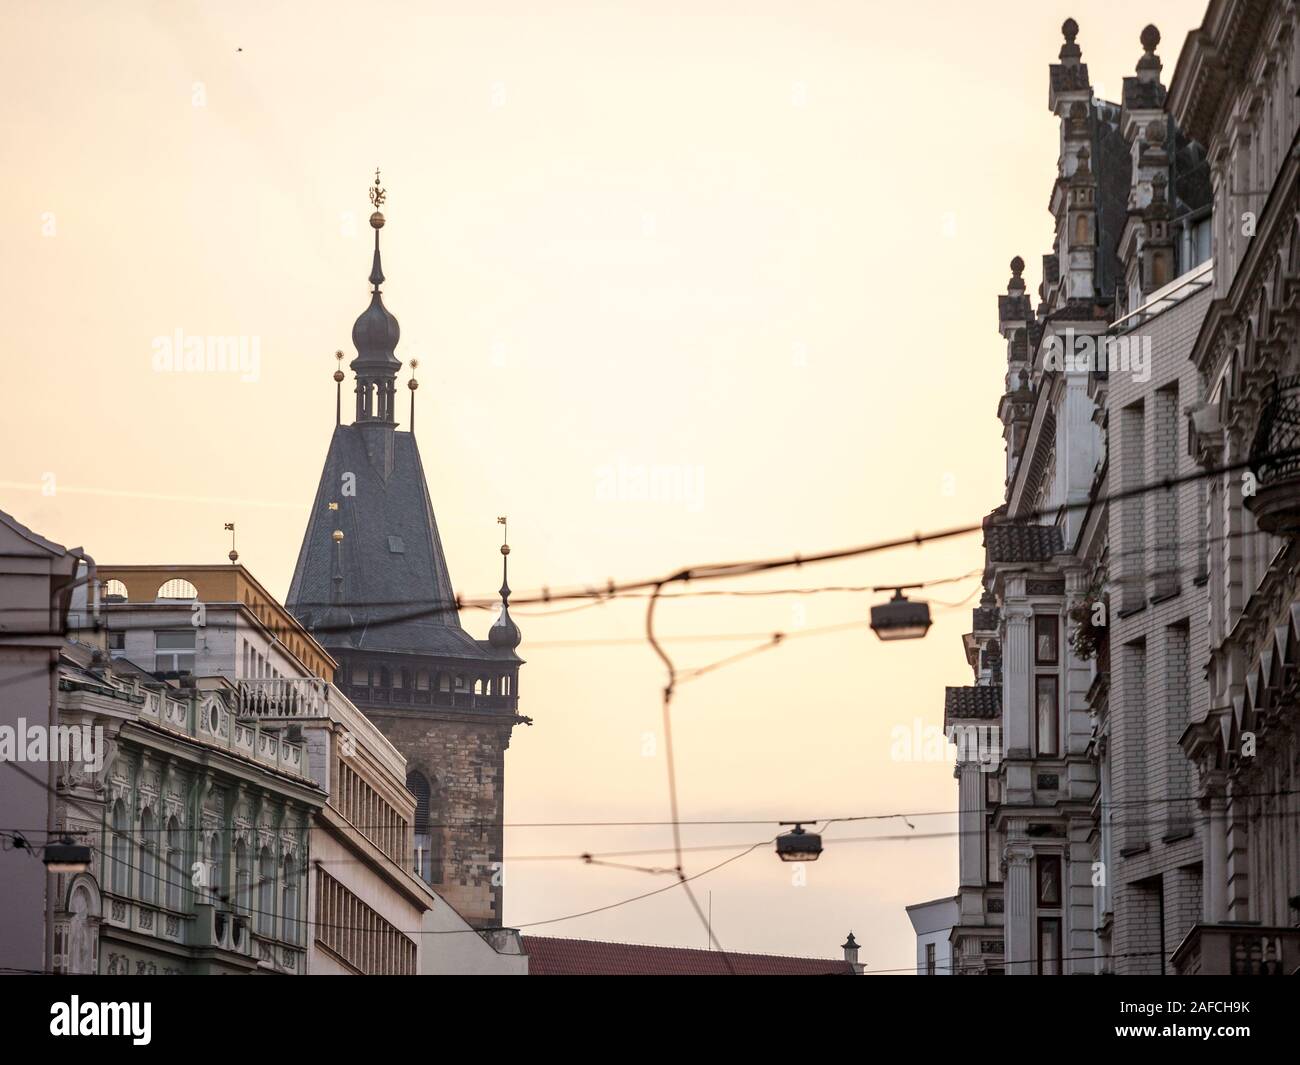 Picture of the iconic belfry tower of the New Town Hall (novomestska radnice) of Prague, Czech Republic, surrounded by narrow touristic medieval stree Stock Photo